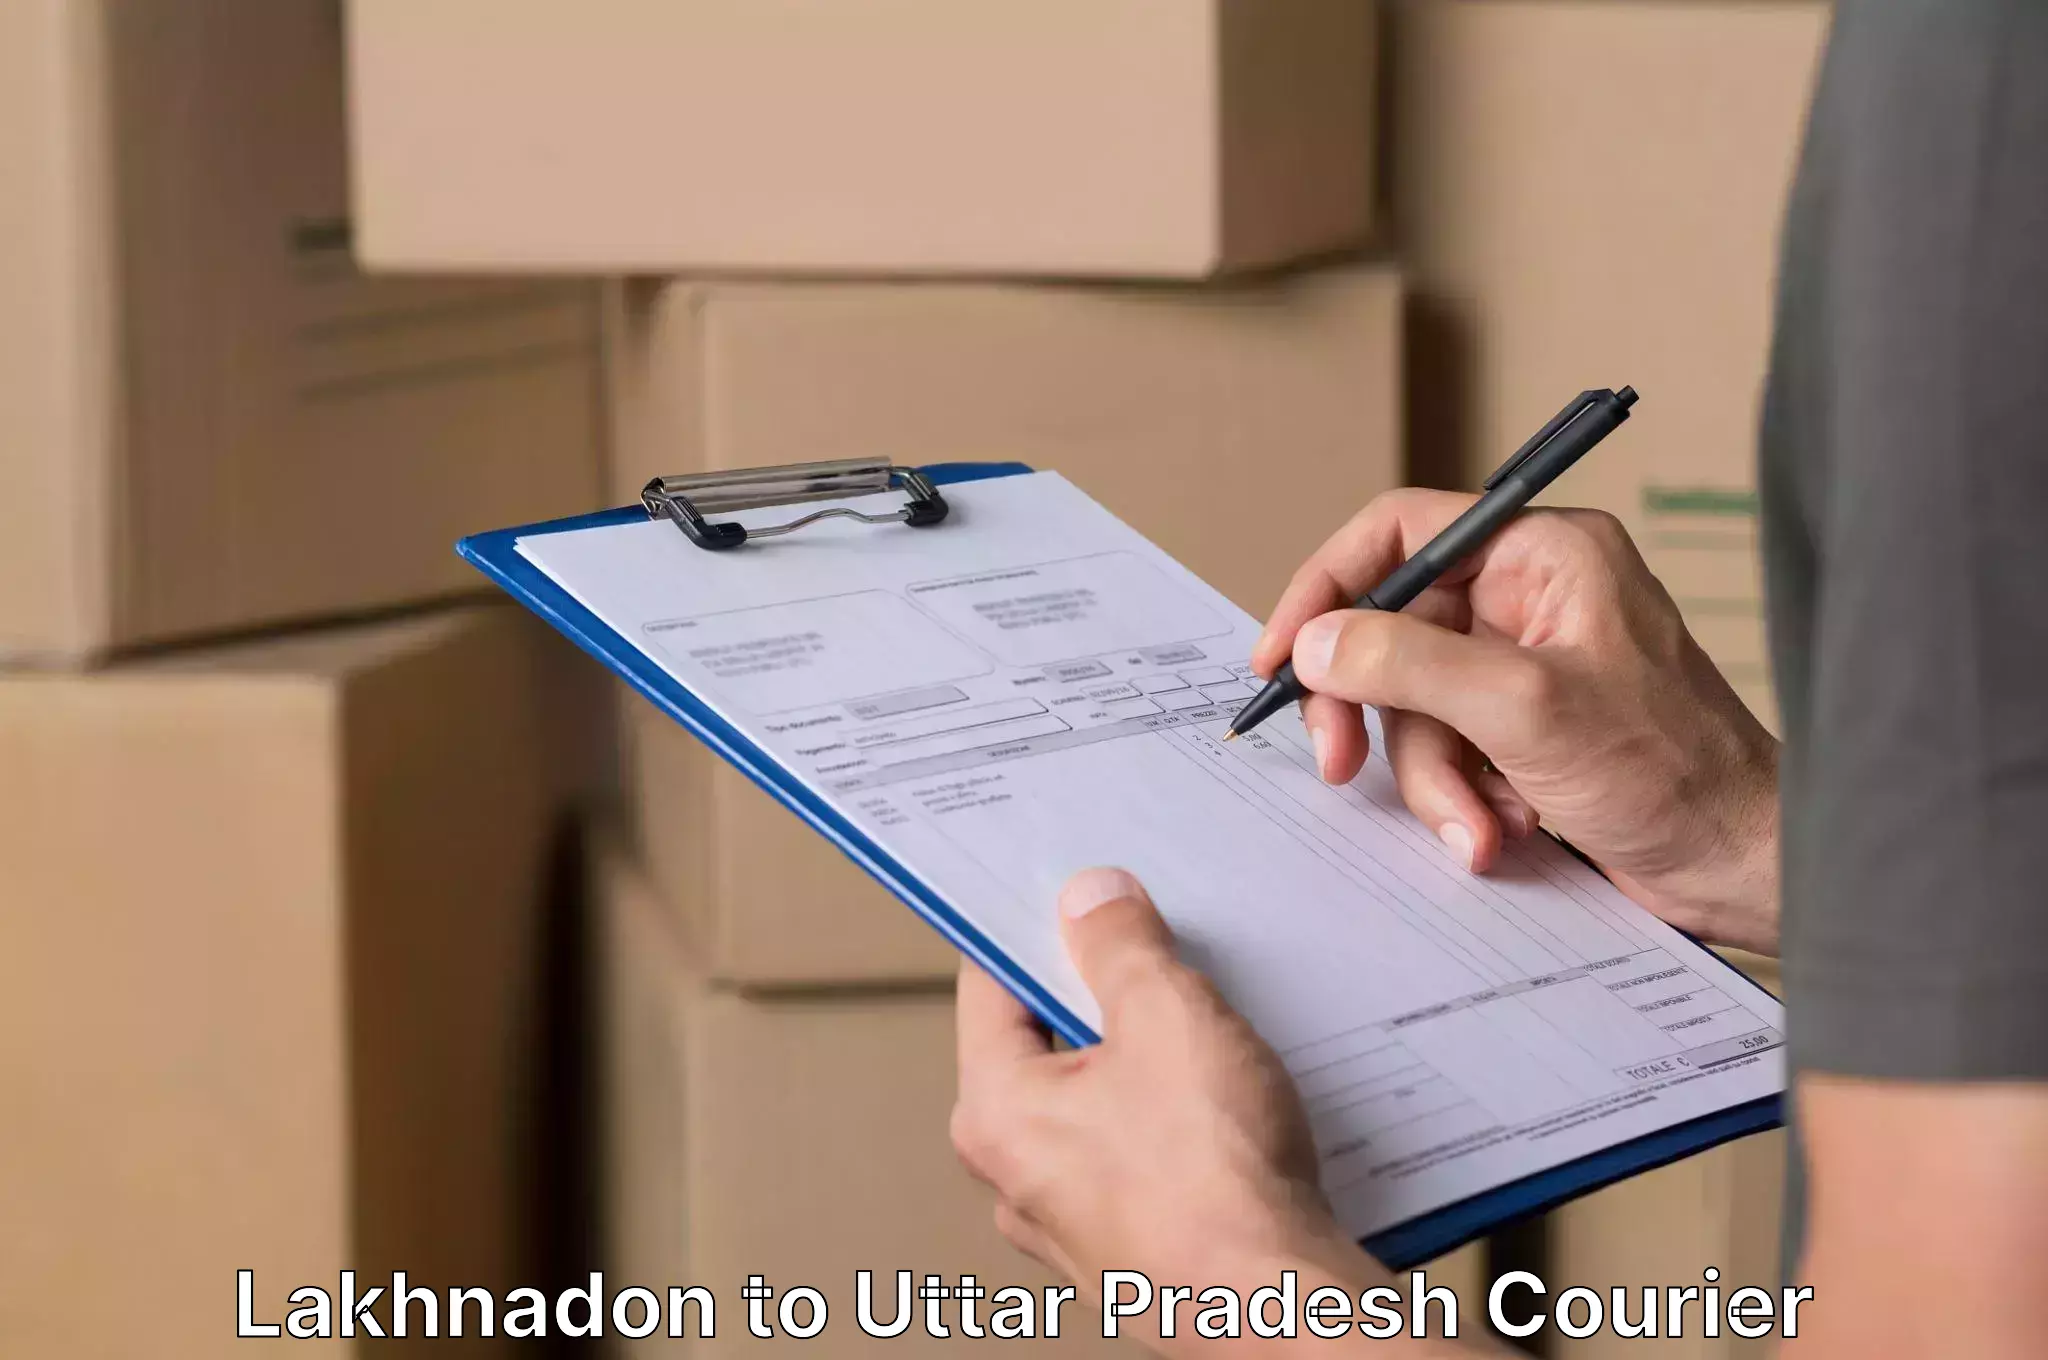 Quality relocation services in Lakhnadon to Lalitpur